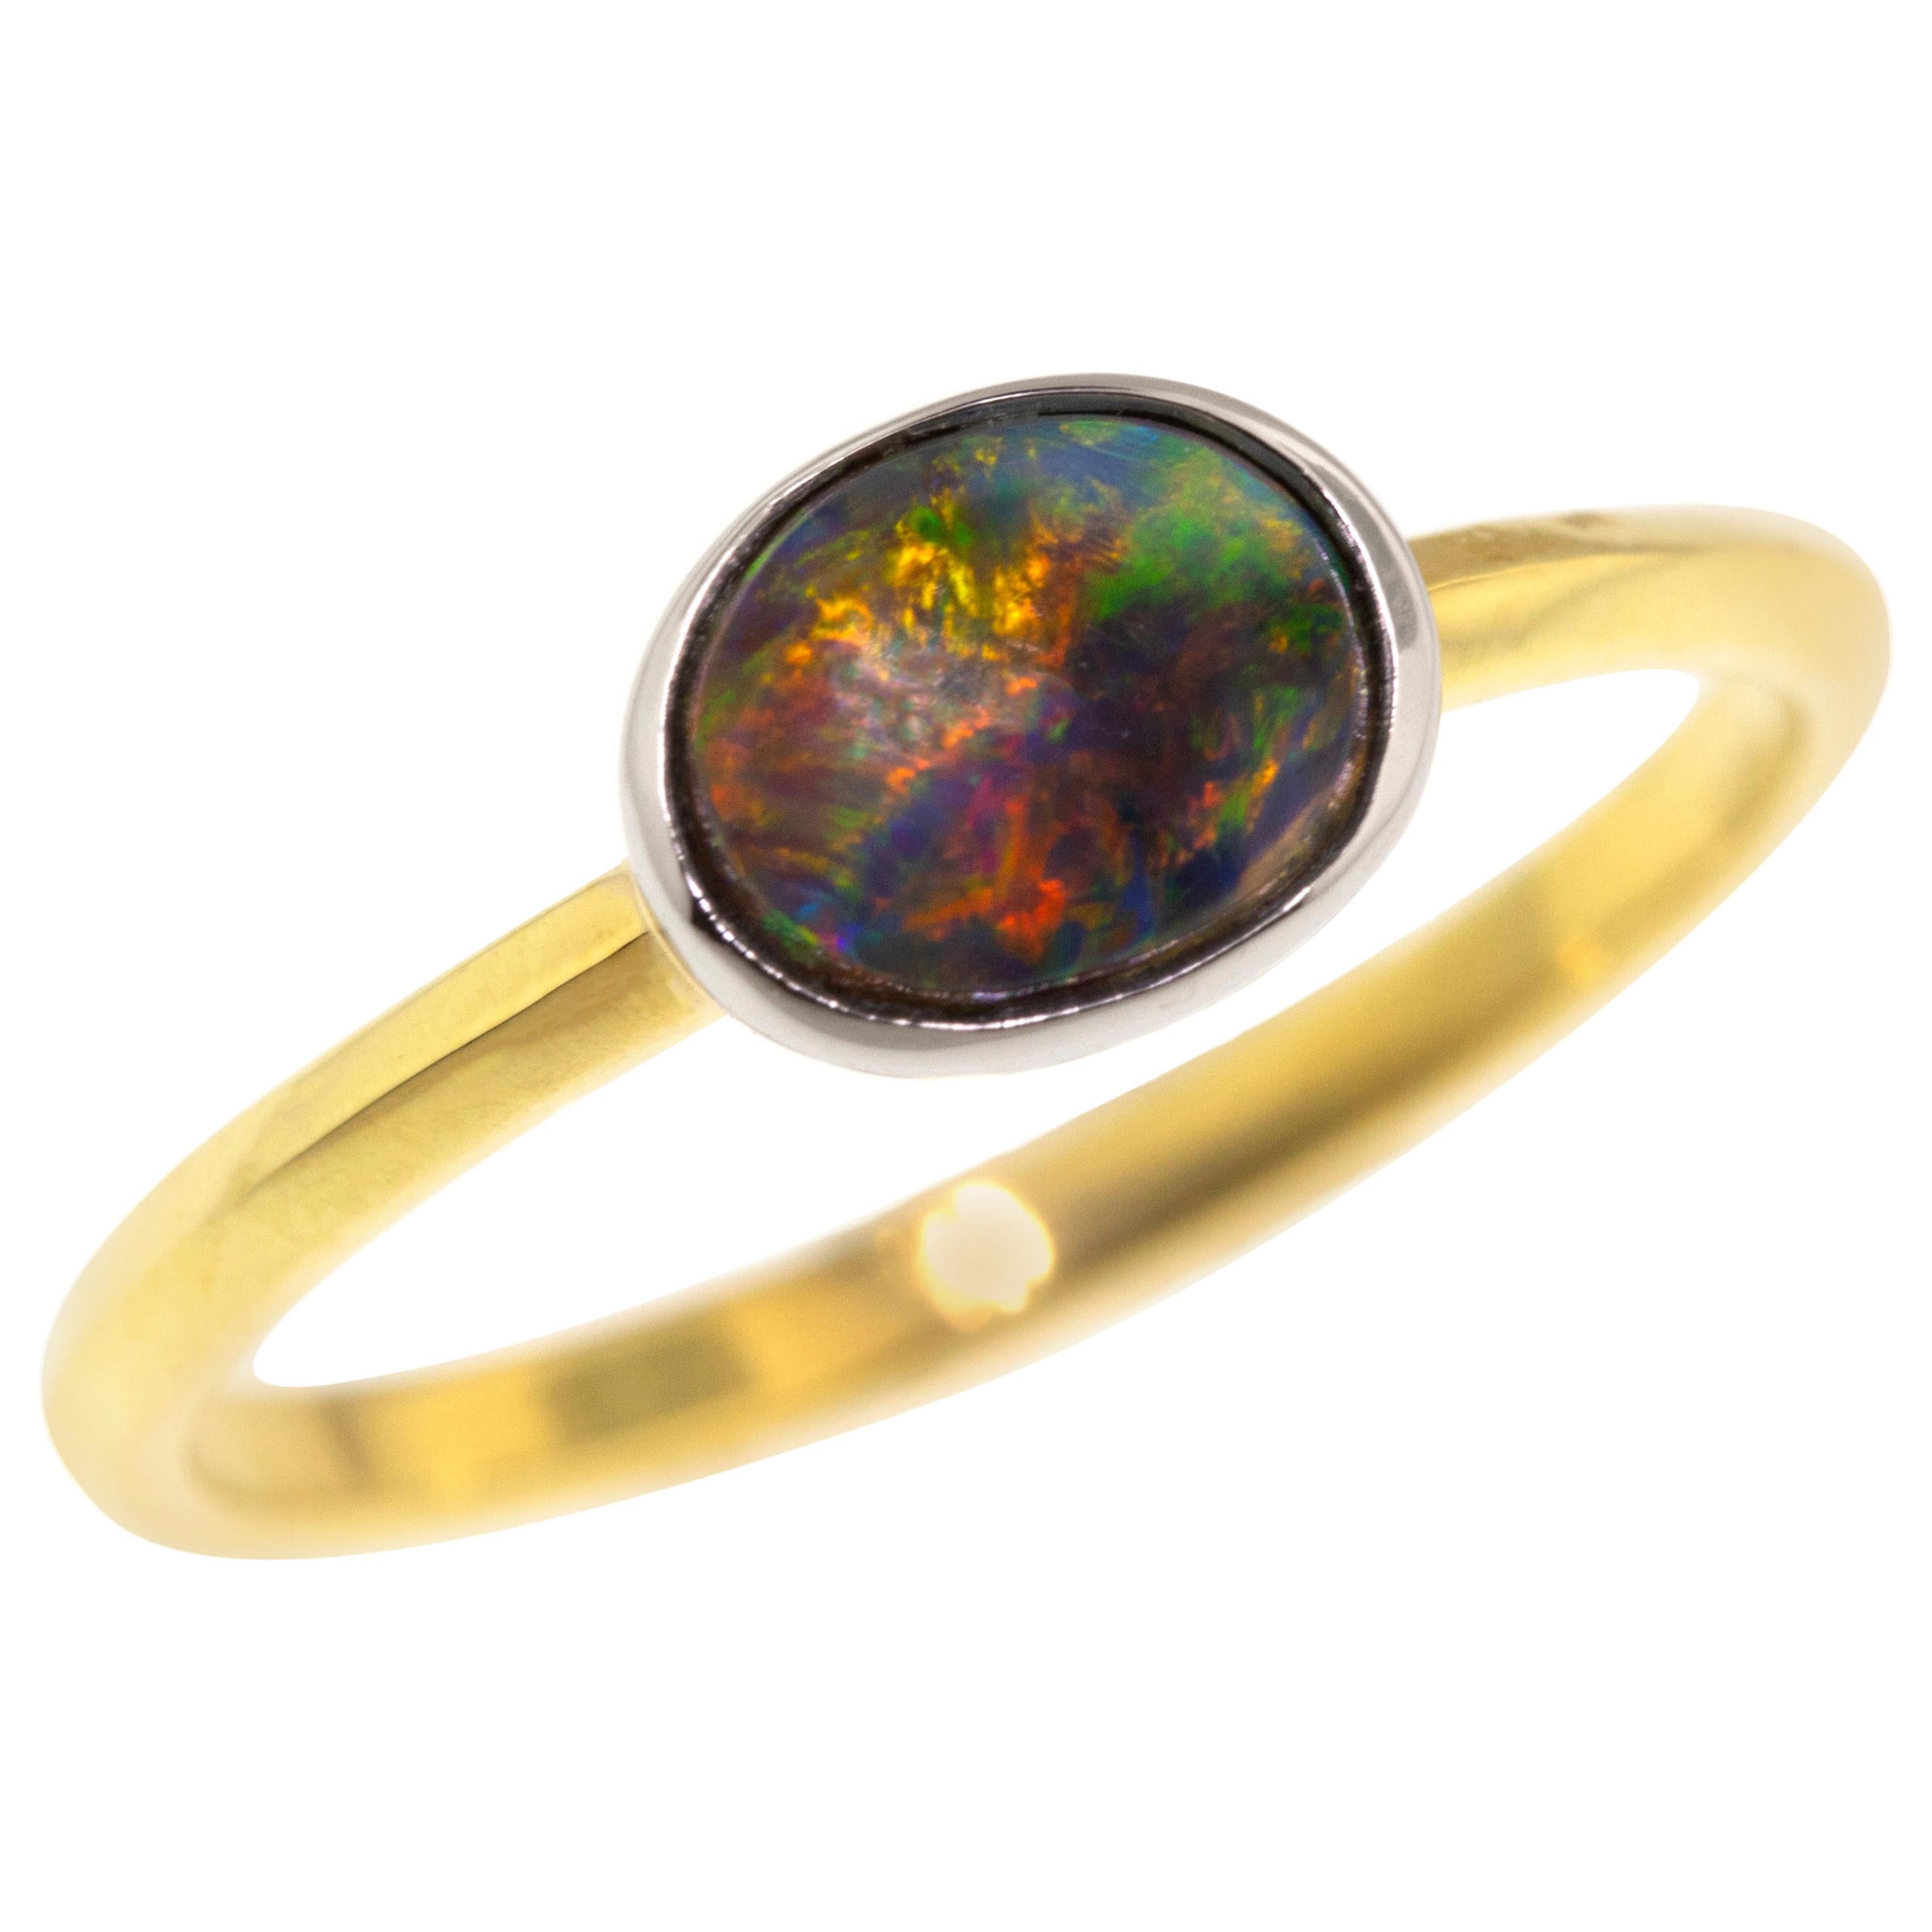 0.59ct Black Opal in 18kt and Platinum Paloma Ring by Cynthia Scott Jewelry